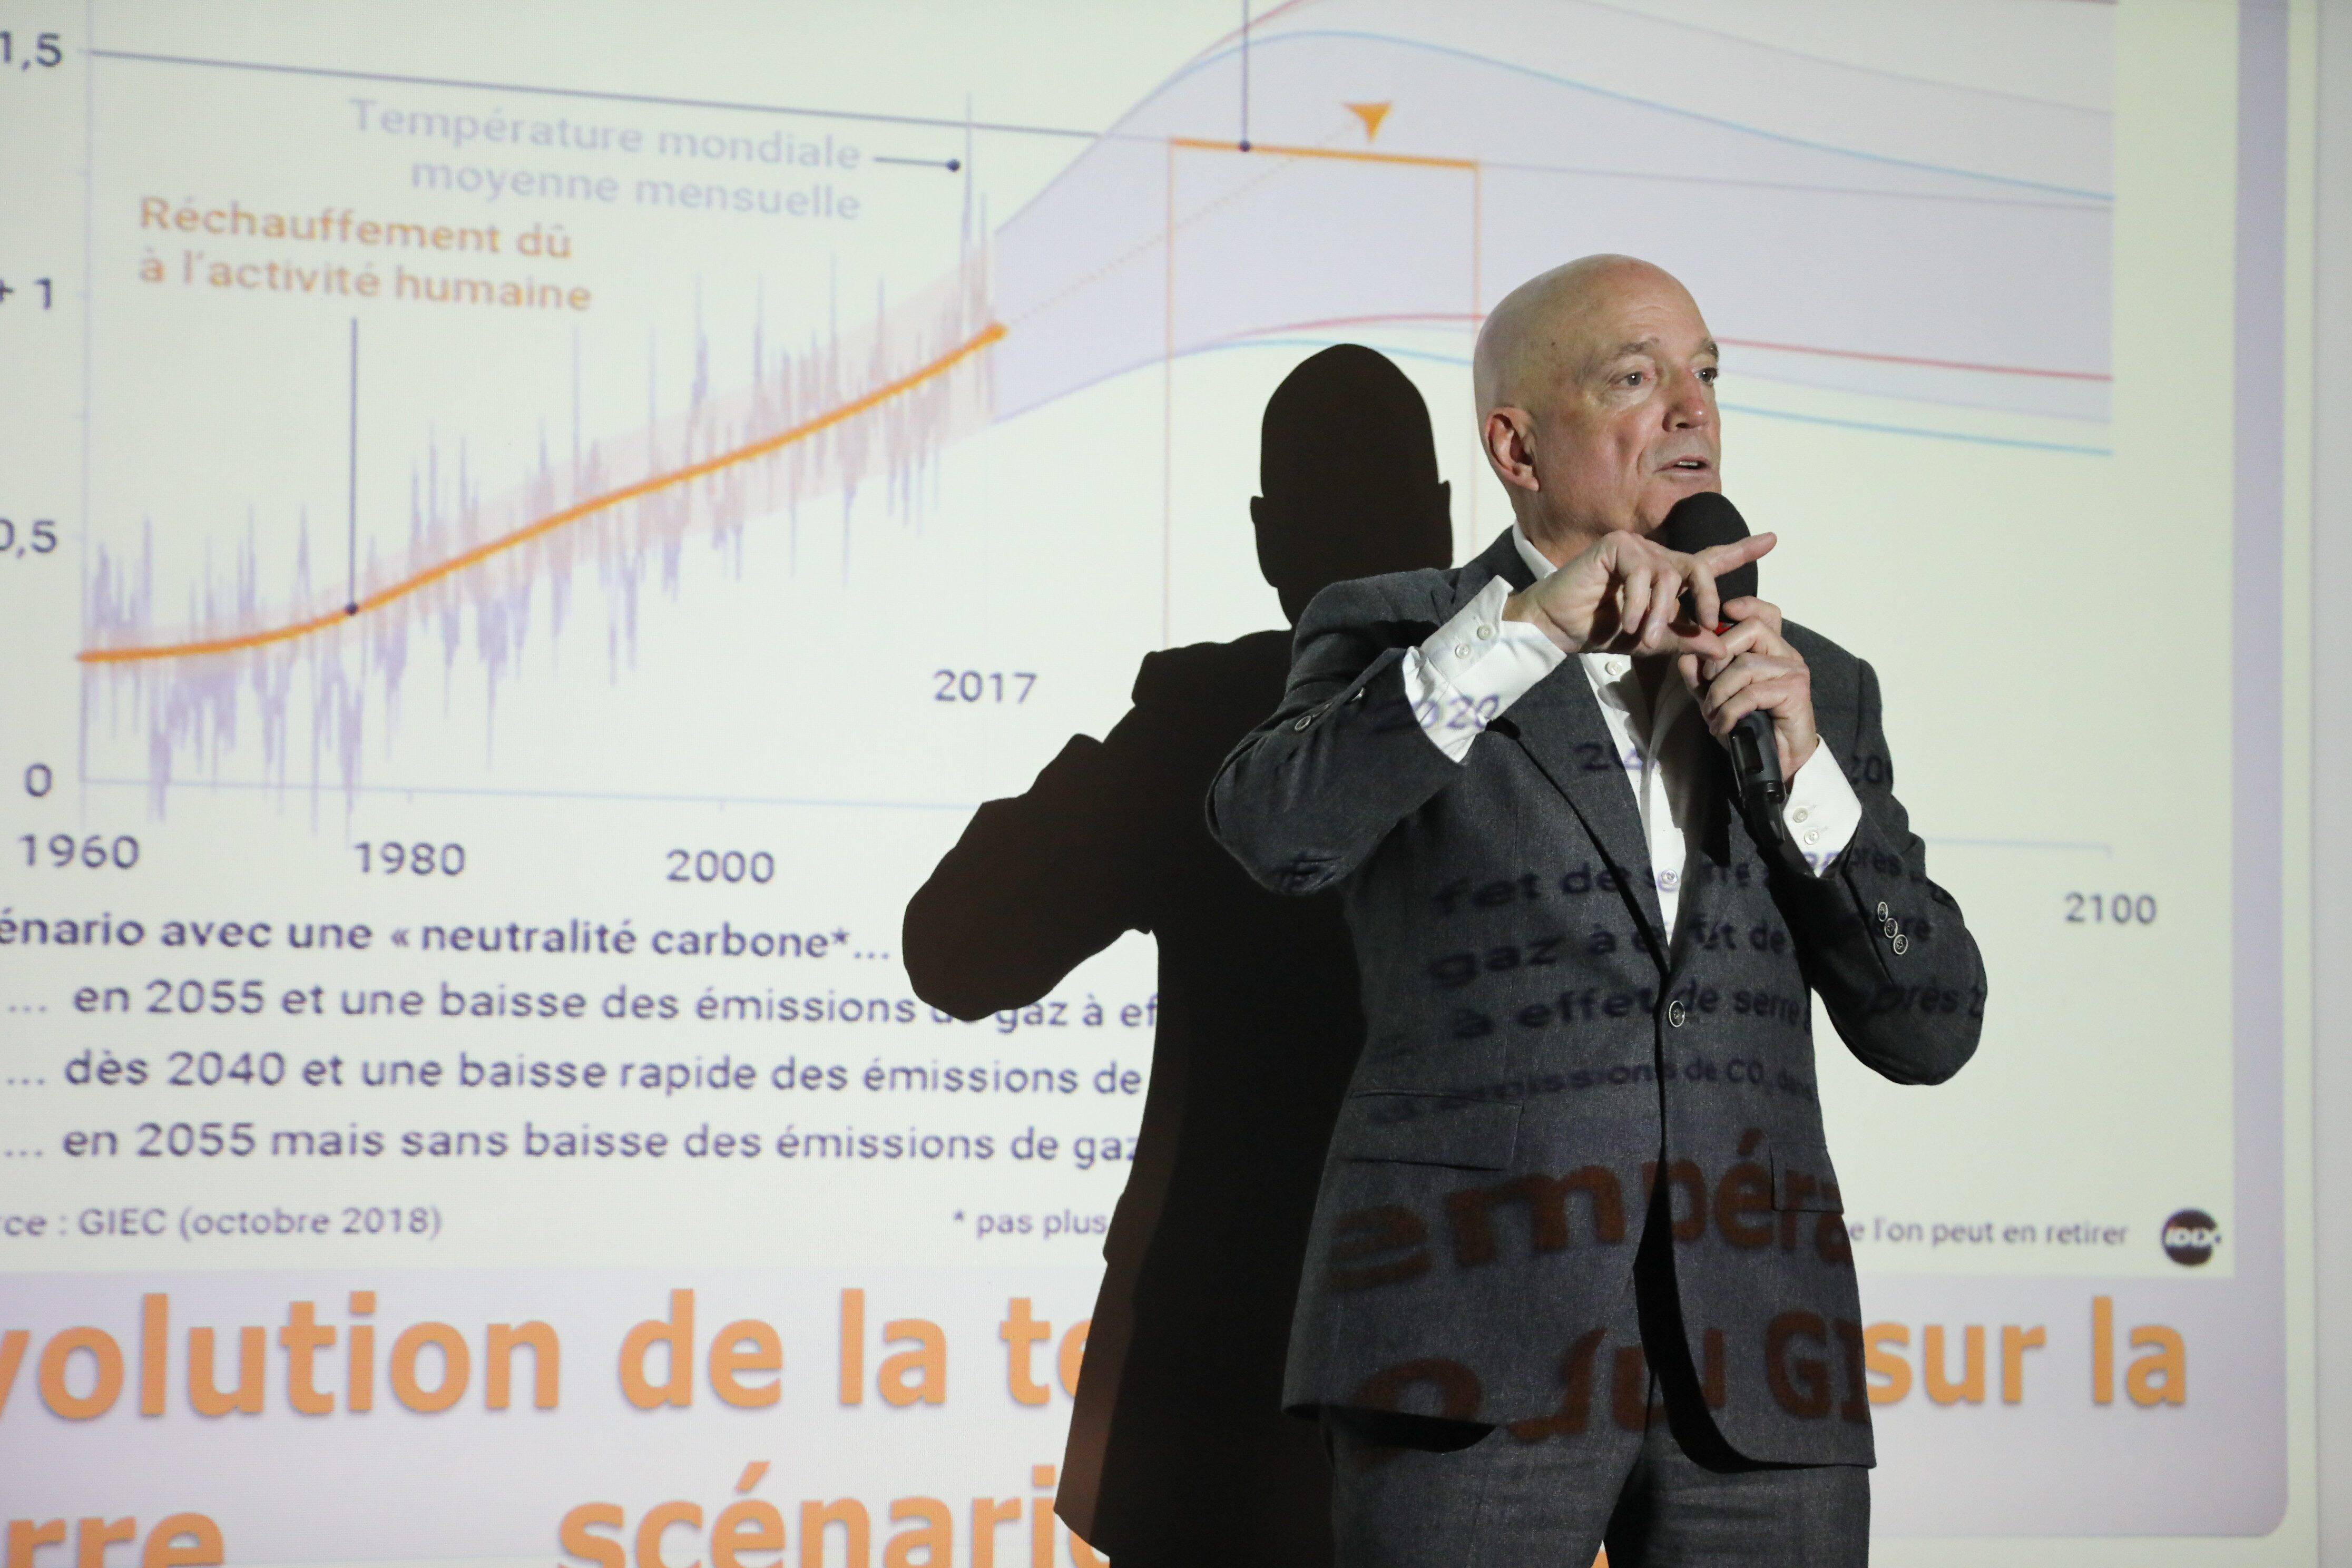 “Meteorology is a science and it continues to advance”: an interview with Louis Boudin at a conference in Grasse